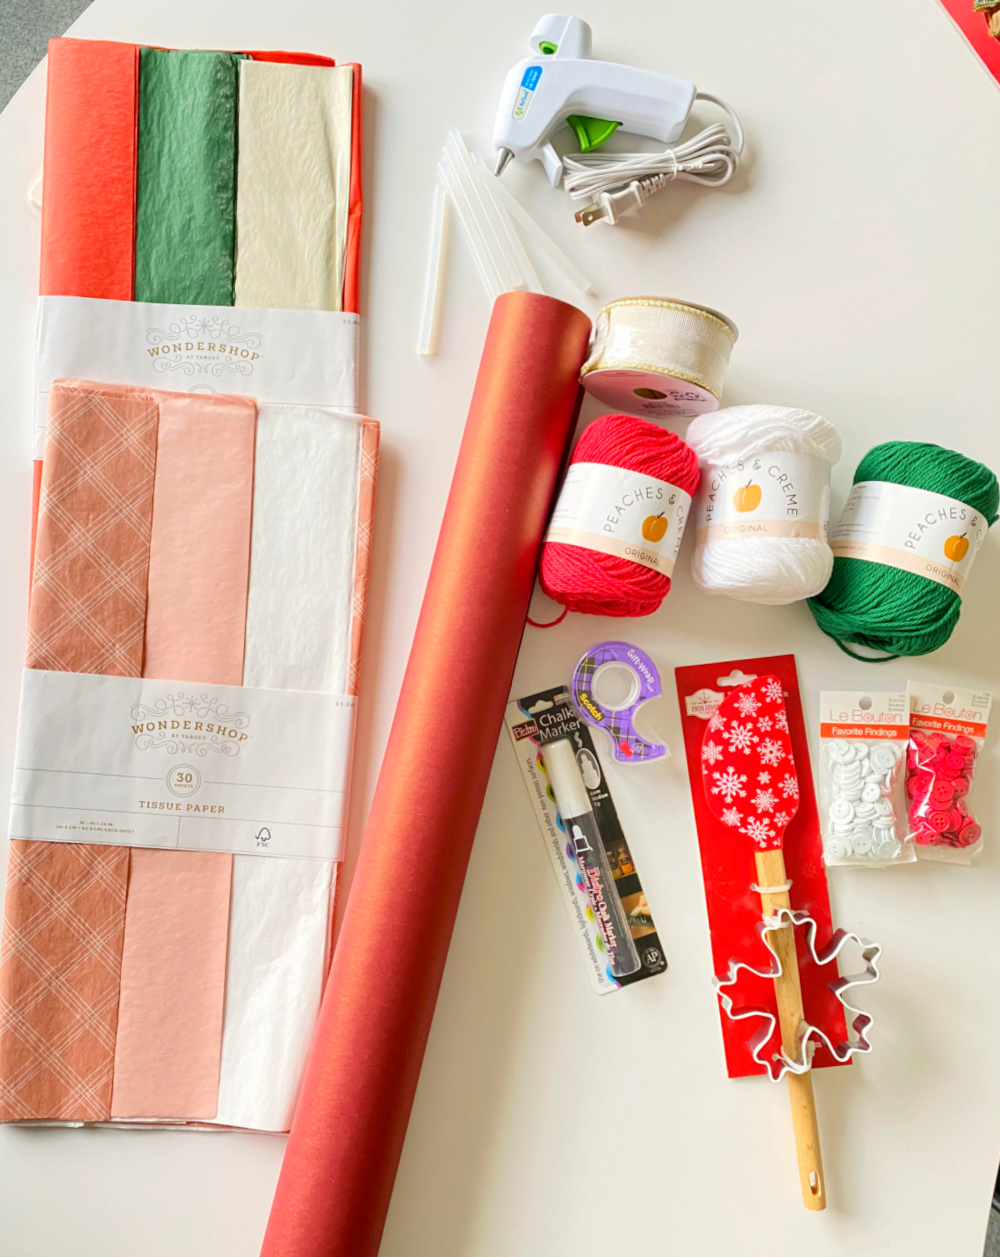 Five Beautiful DIY Christmas Gift Wrapping Ideas - At Home with Jemma